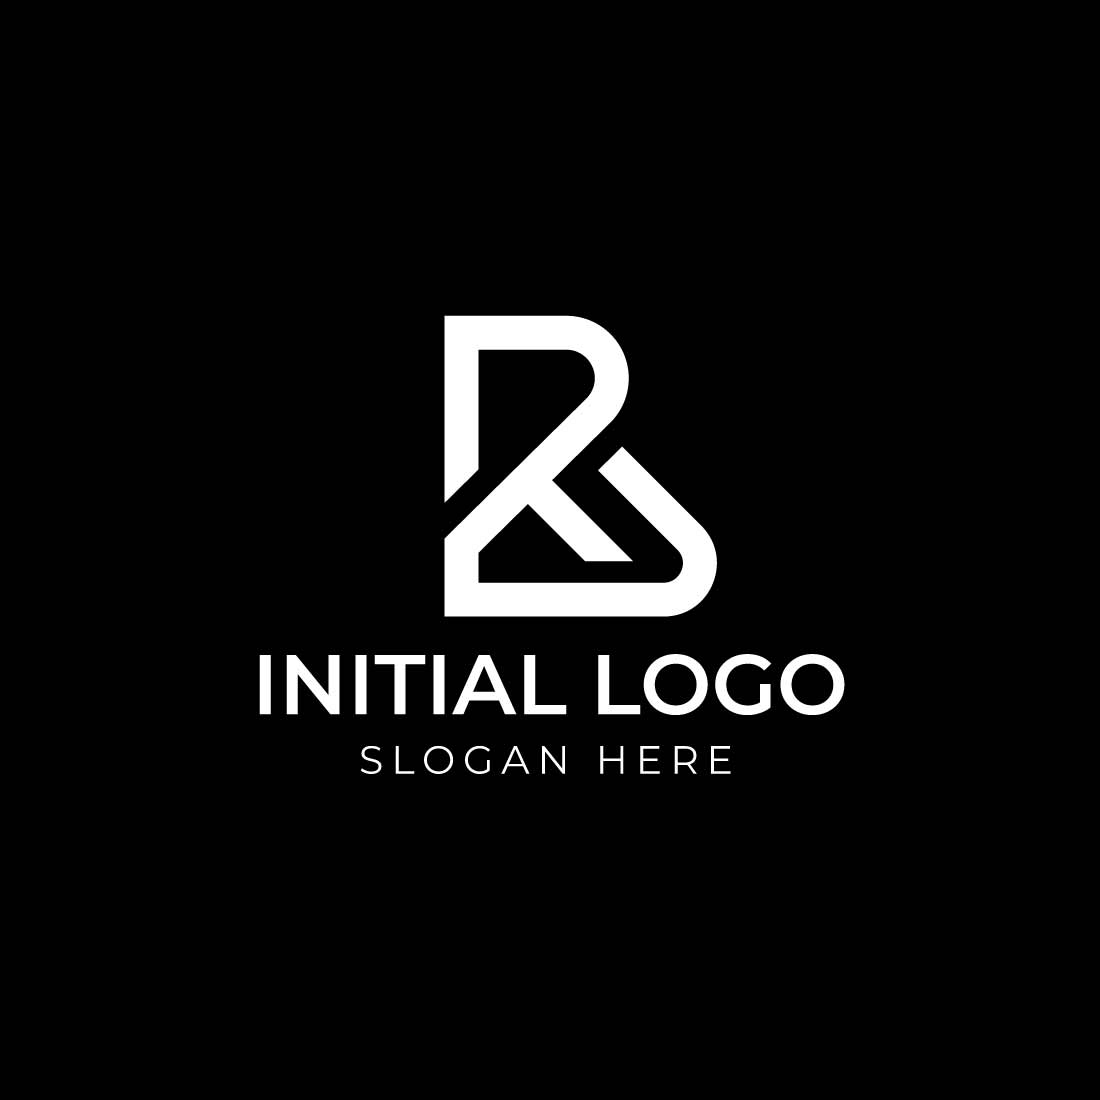 Minimal Innovative Initial AS logo and SA logo Letter preview image.